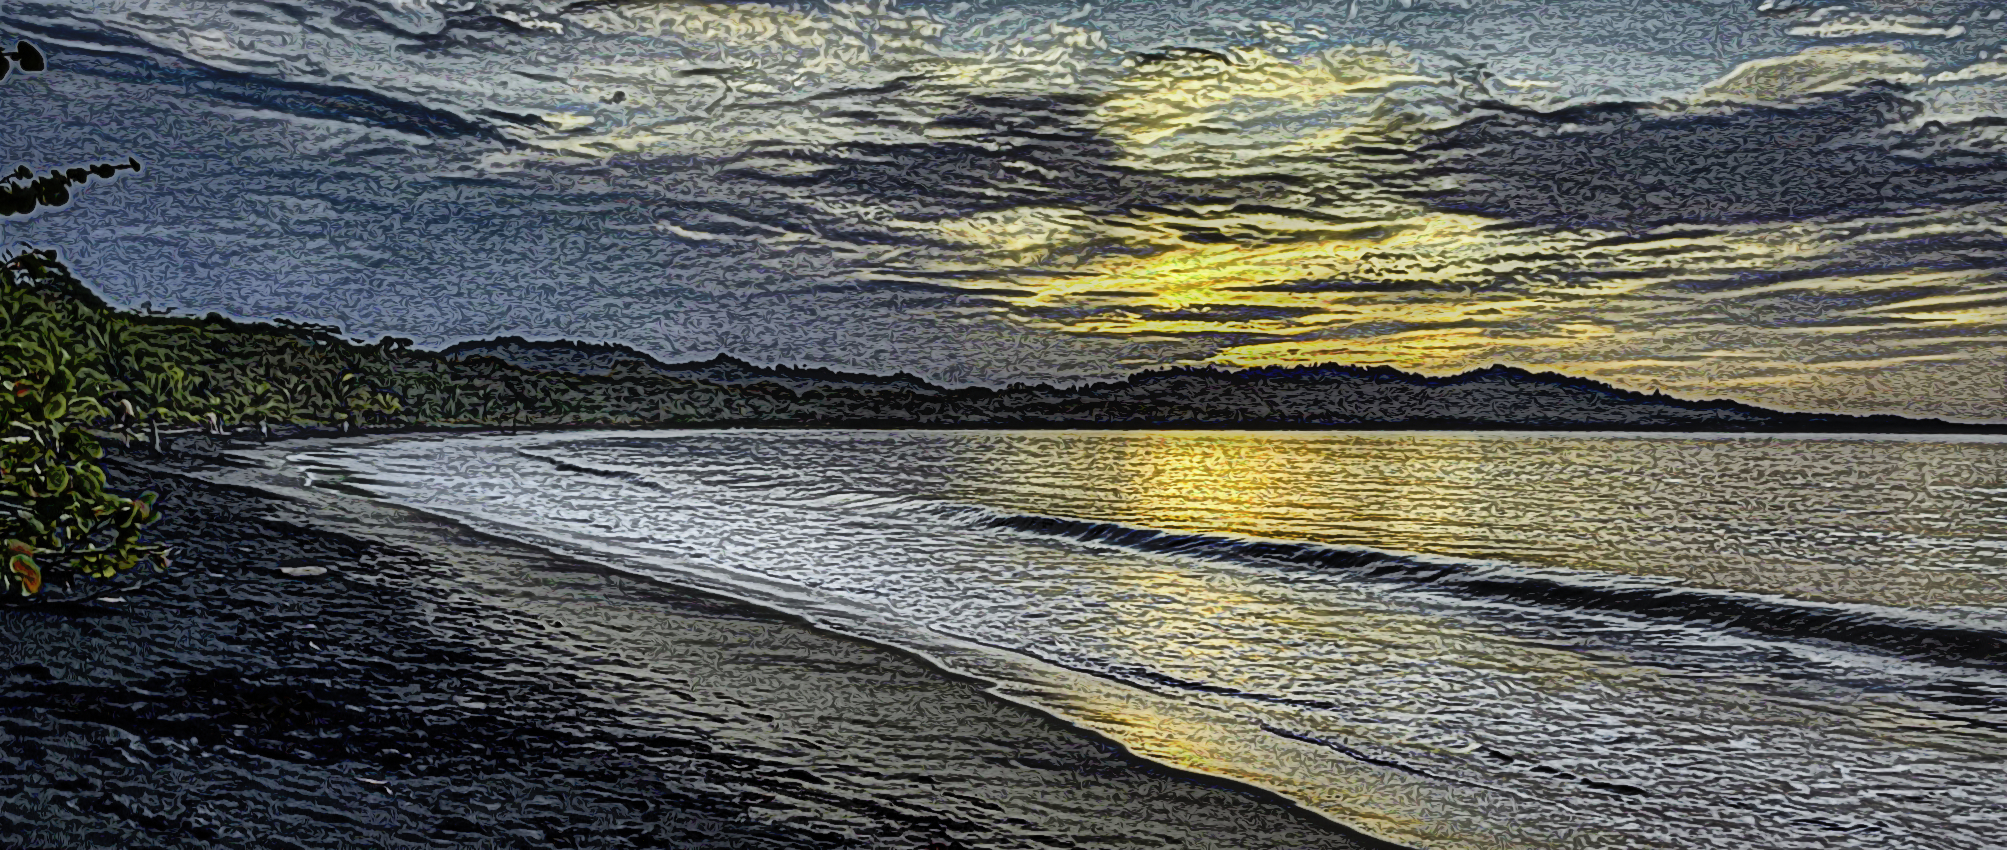 Sunset over the beach in Puerto Viejo, Costa Rica